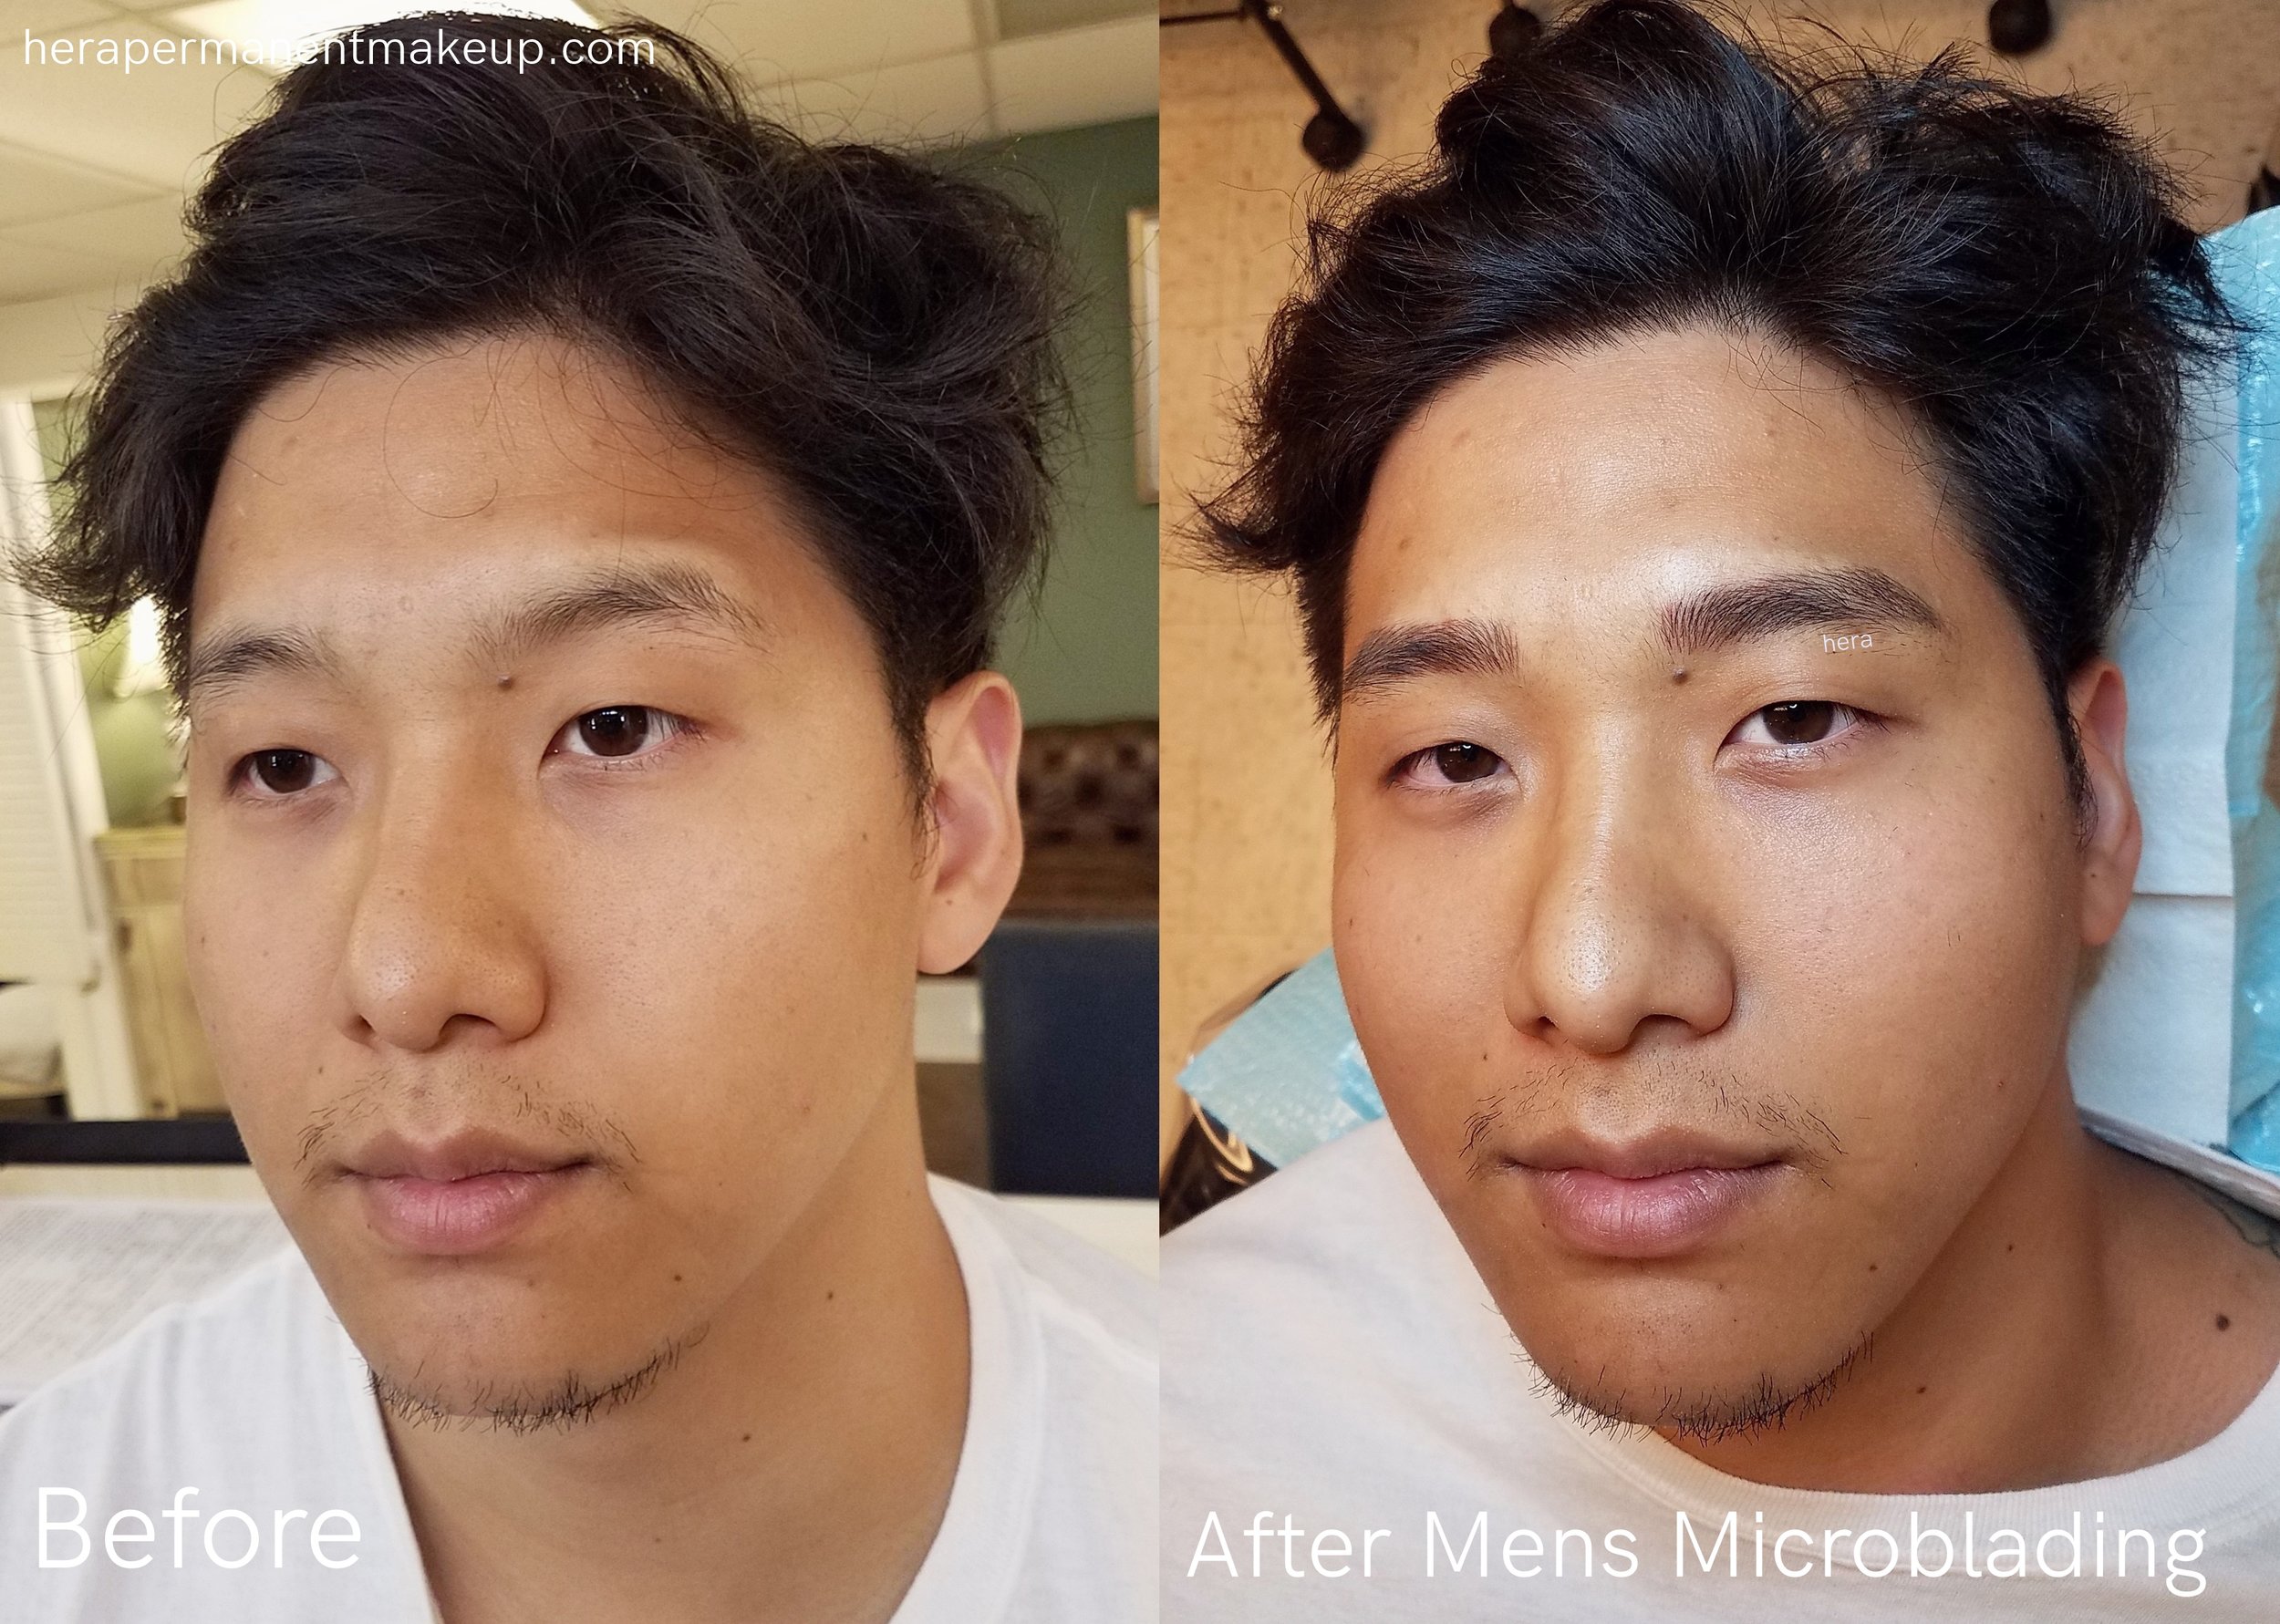 Microblading for Men is Totally a Thing